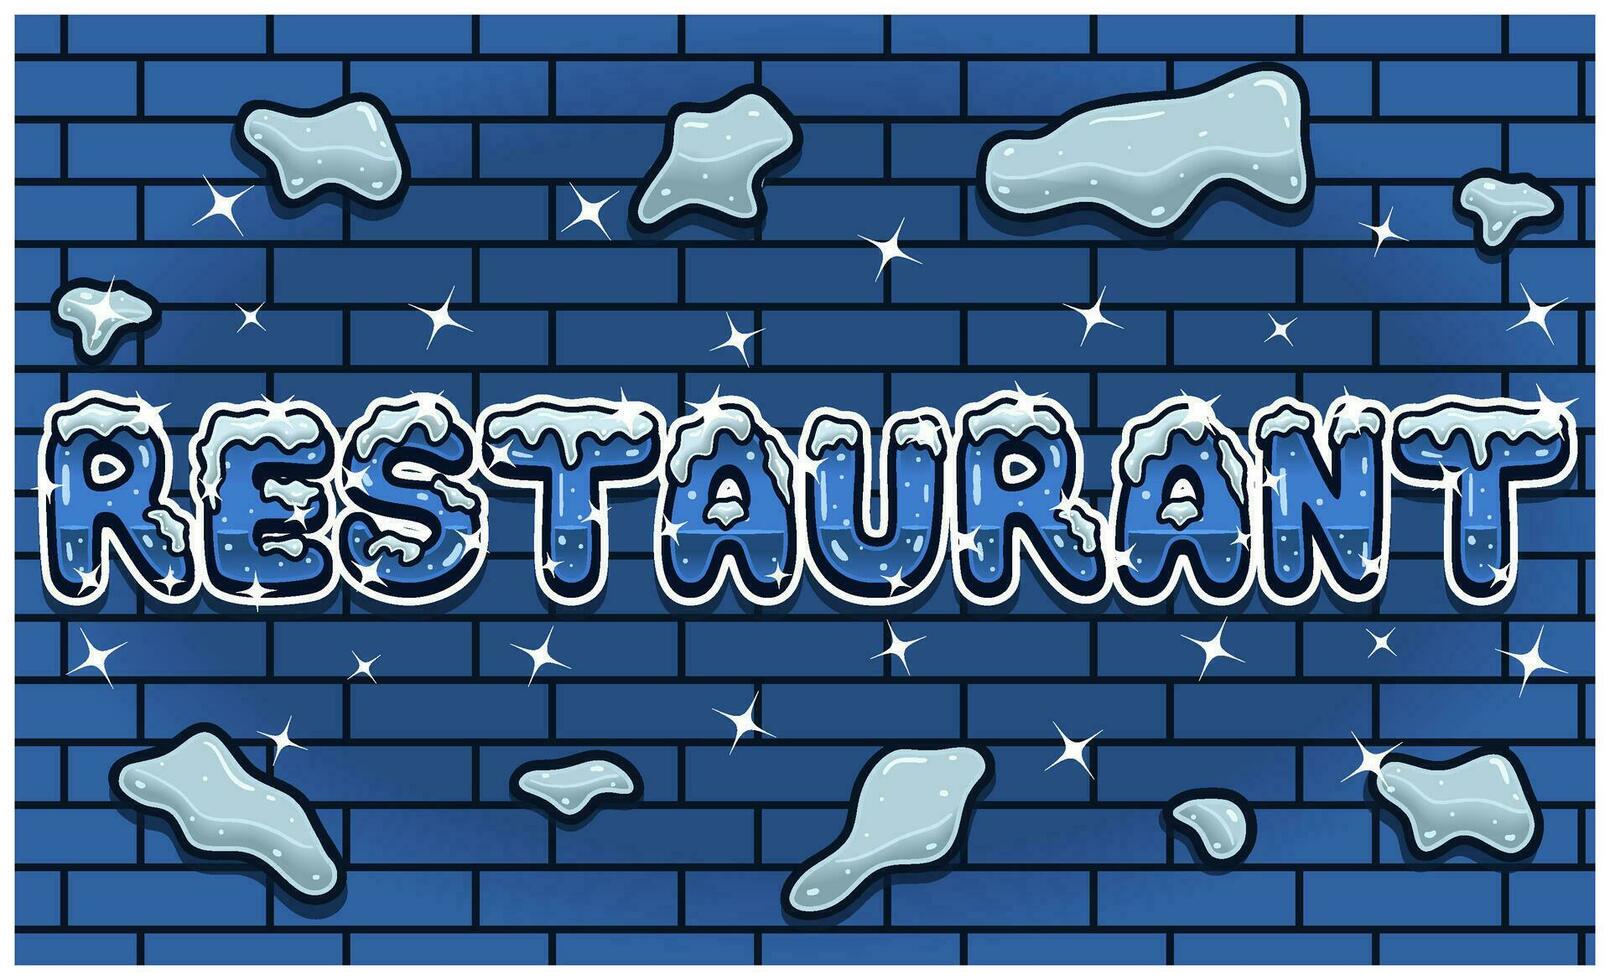 Restaurant Lettering With Snow Ice Font In Brick Wall Background For Sign Template. Text Effect and Simple Gradients. vector